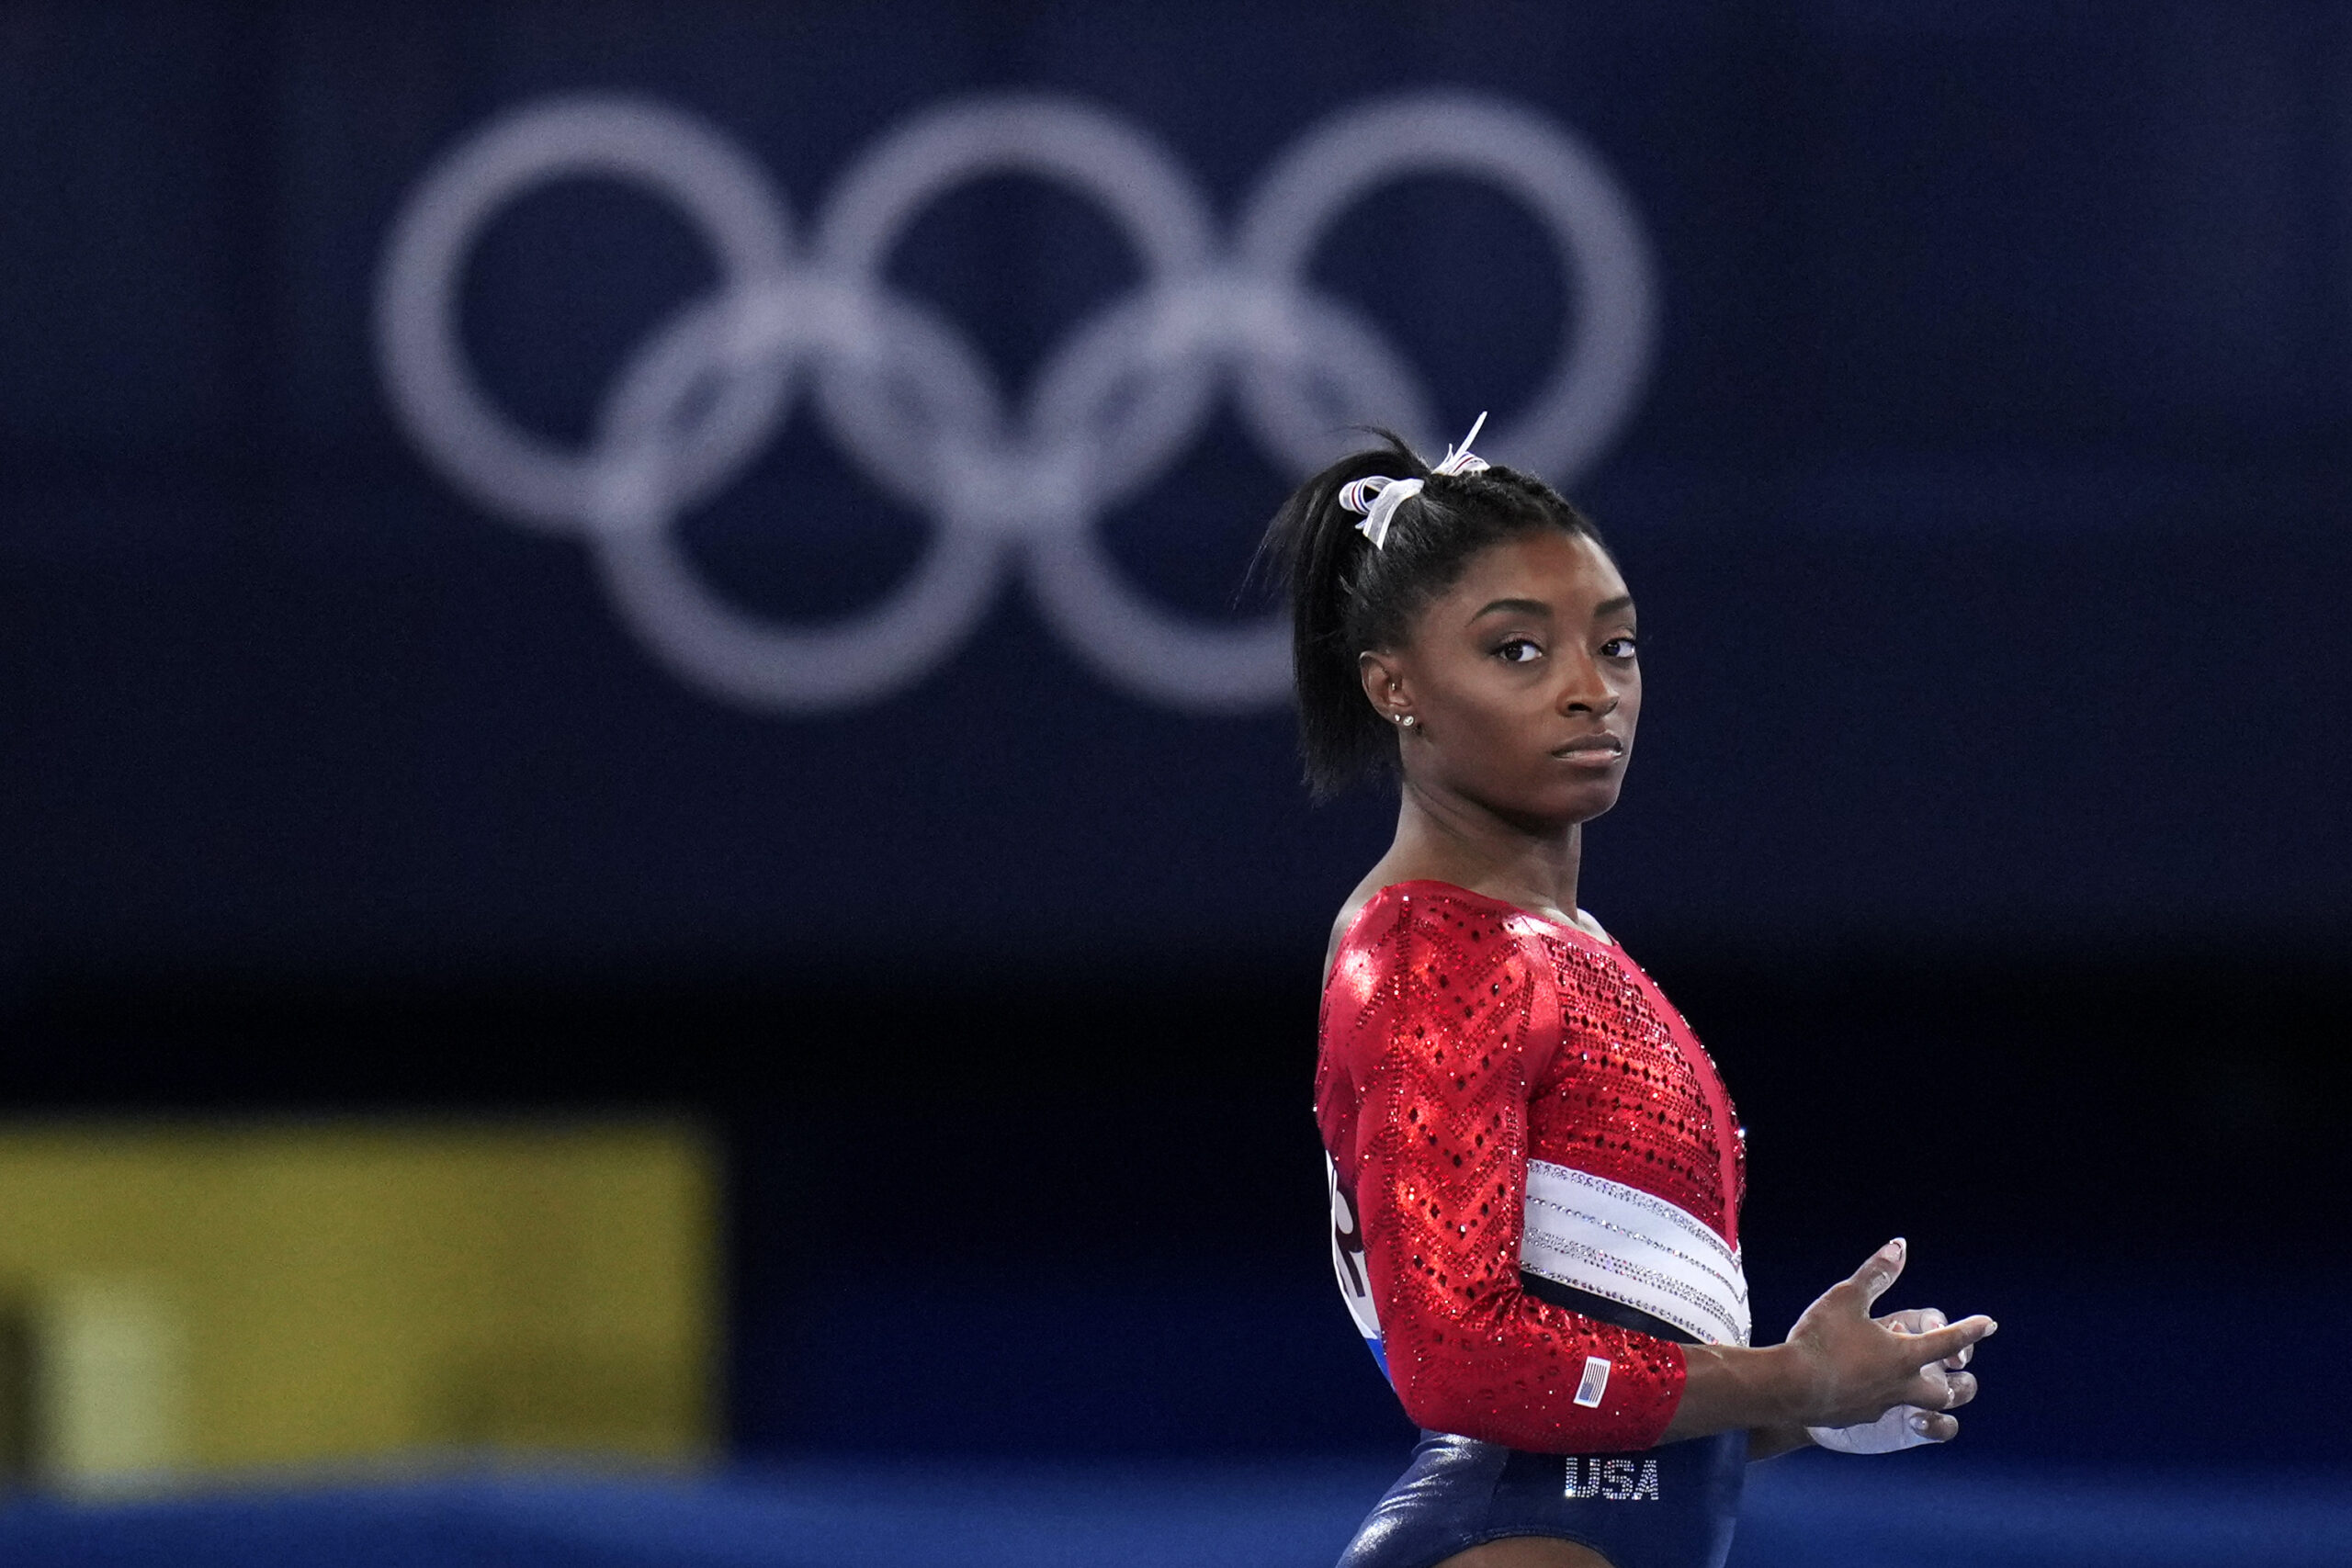 File-This July 27, 2021, file photo shows Simone Biles, of the United States, waiting to perform on the vault during the artistic gymnastics women's final at the 2020 Summer Olympics, Tuesday, July 27, 2021, in Tokyo. Biles’ sponsors including Athleta and Visa are lauding her decision to put her mental health first and withdraw from the gymnastics team competition during the Olympics. It’s the latest example of sponsors praising athletes who are increasingly open about mental health issues. (AP Photo/Gregory Bull, File)